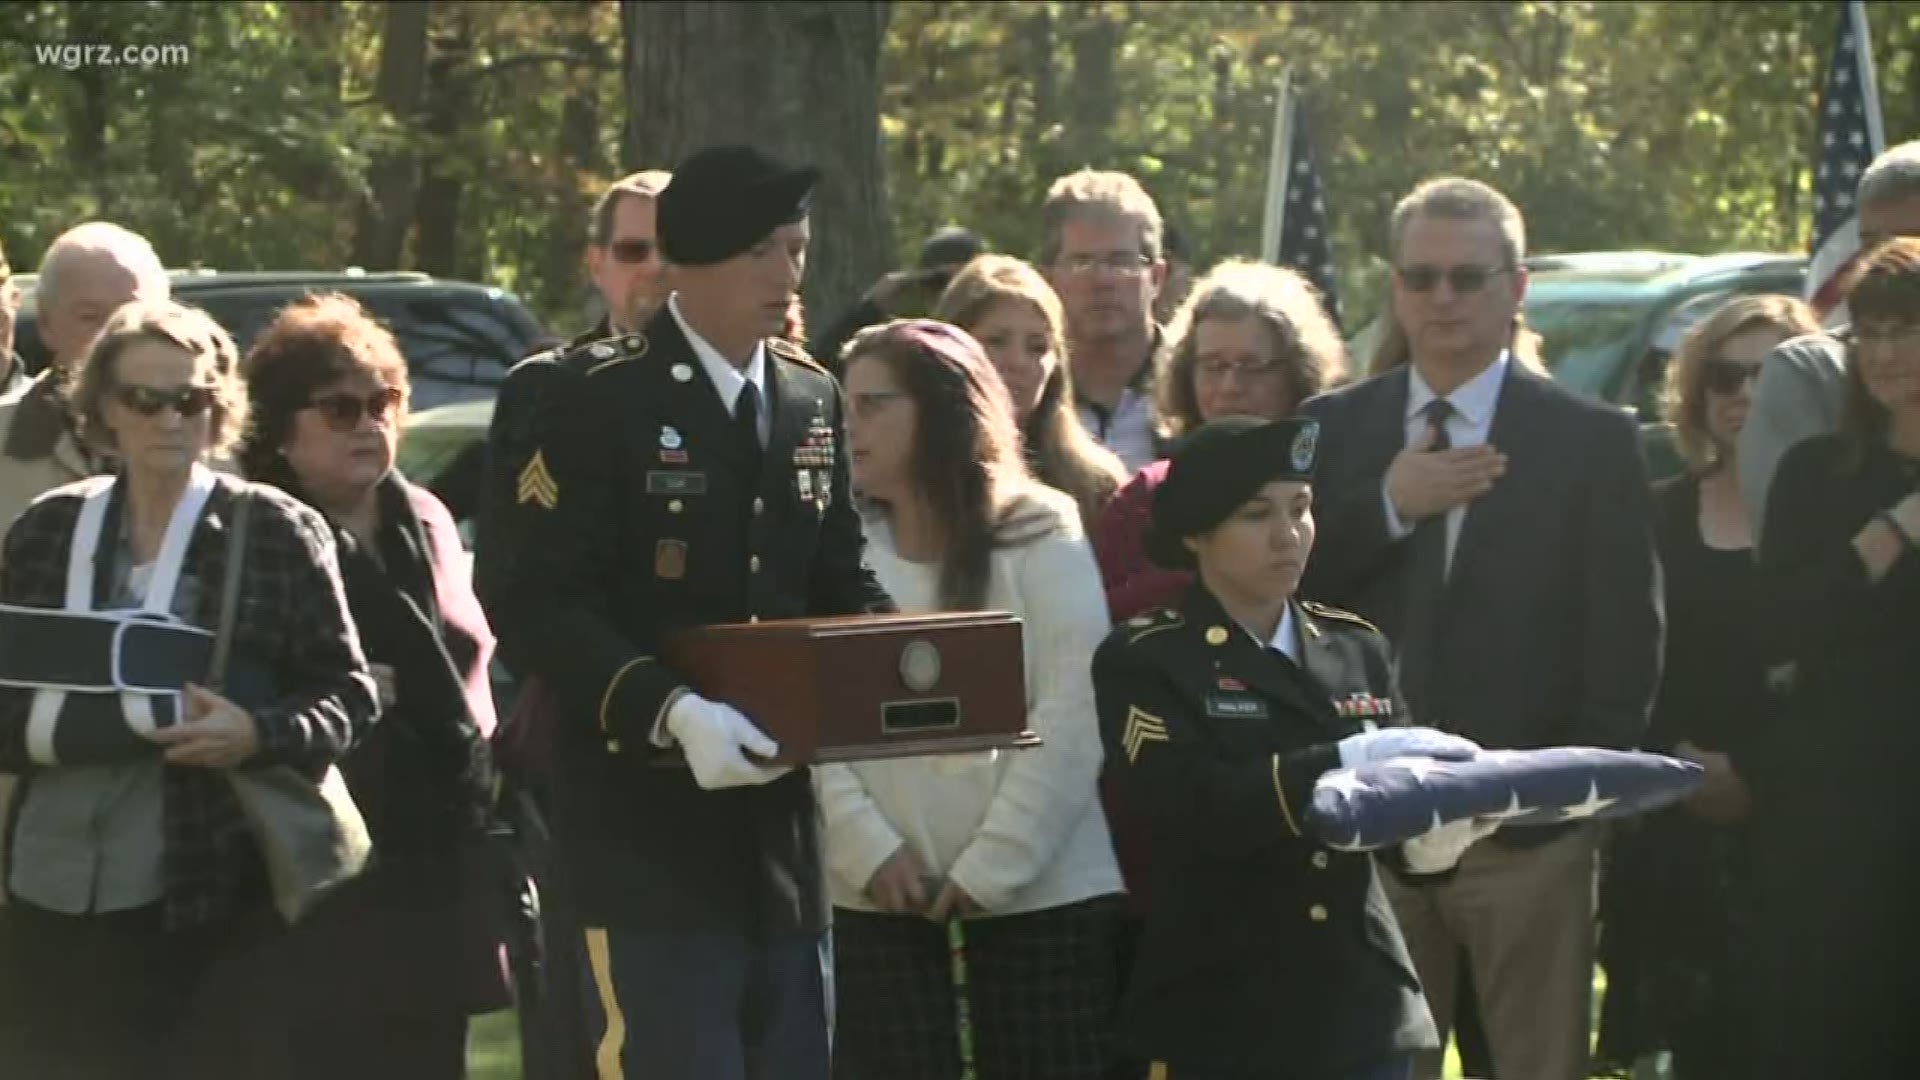 The remains of a Korean War soldier are now back home in Western New York.